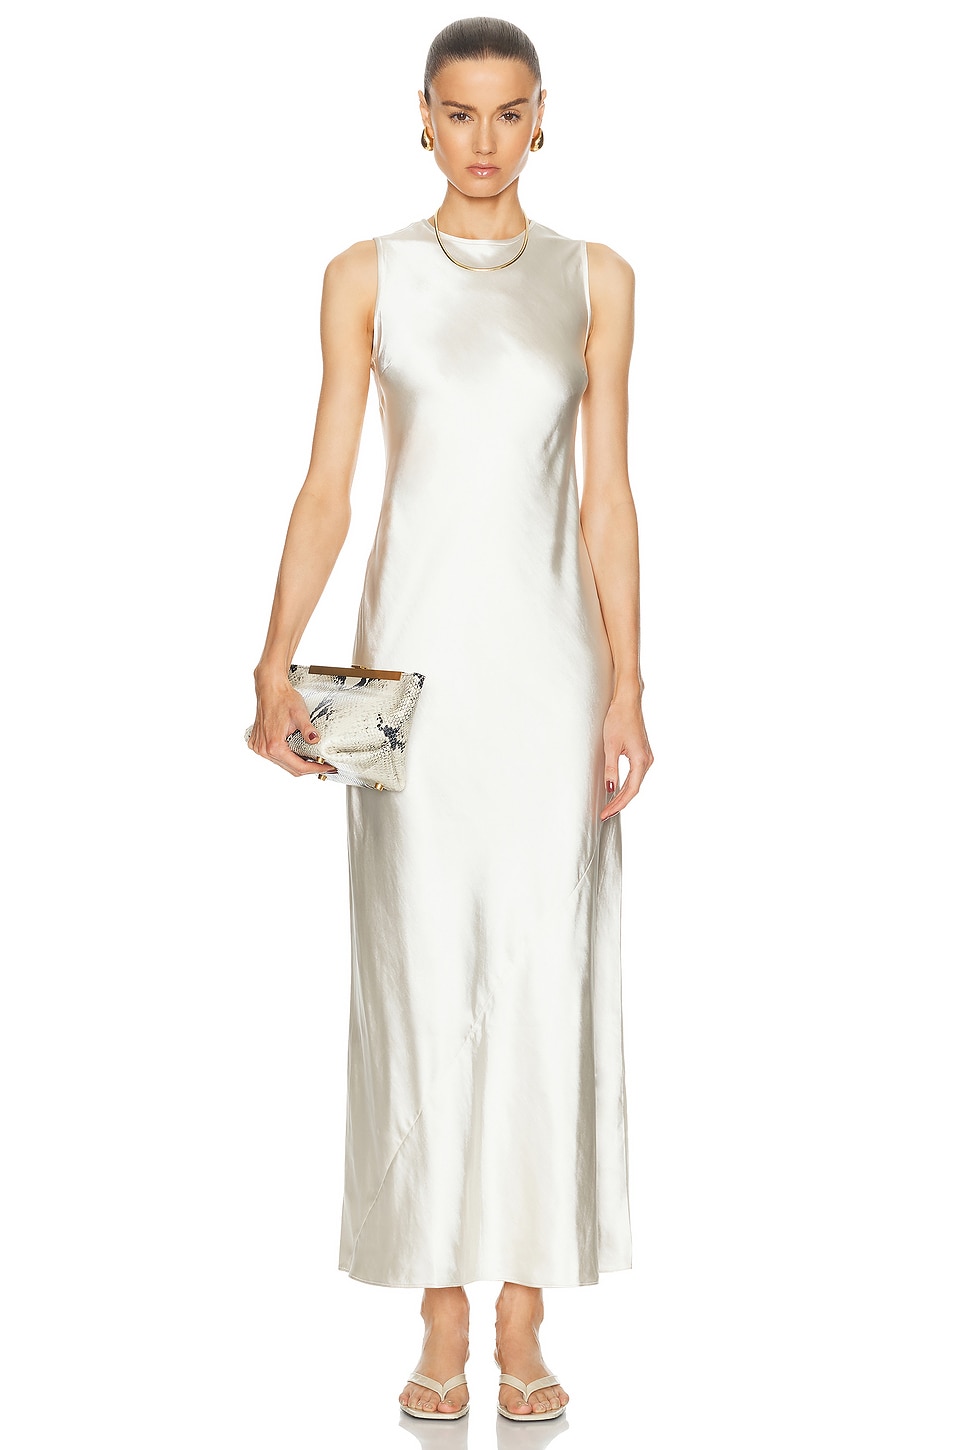 Image 1 of L'Academie by Marianna Etienne Maxi Dress in Ivory